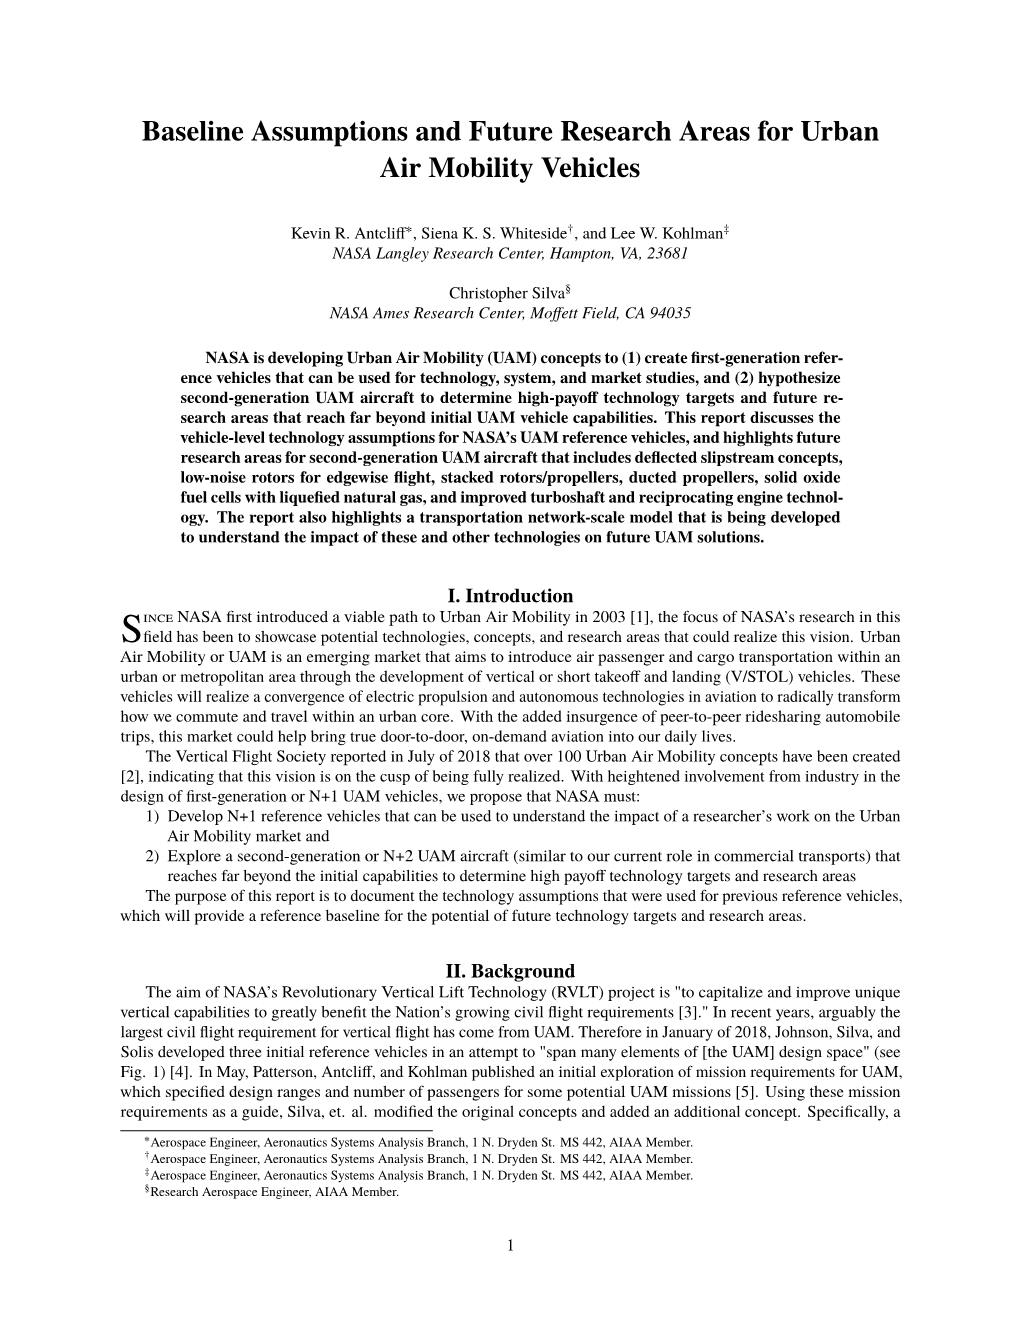 Baseline Assumptions and Future Research Areas for Urban Air Mobility Vehicles